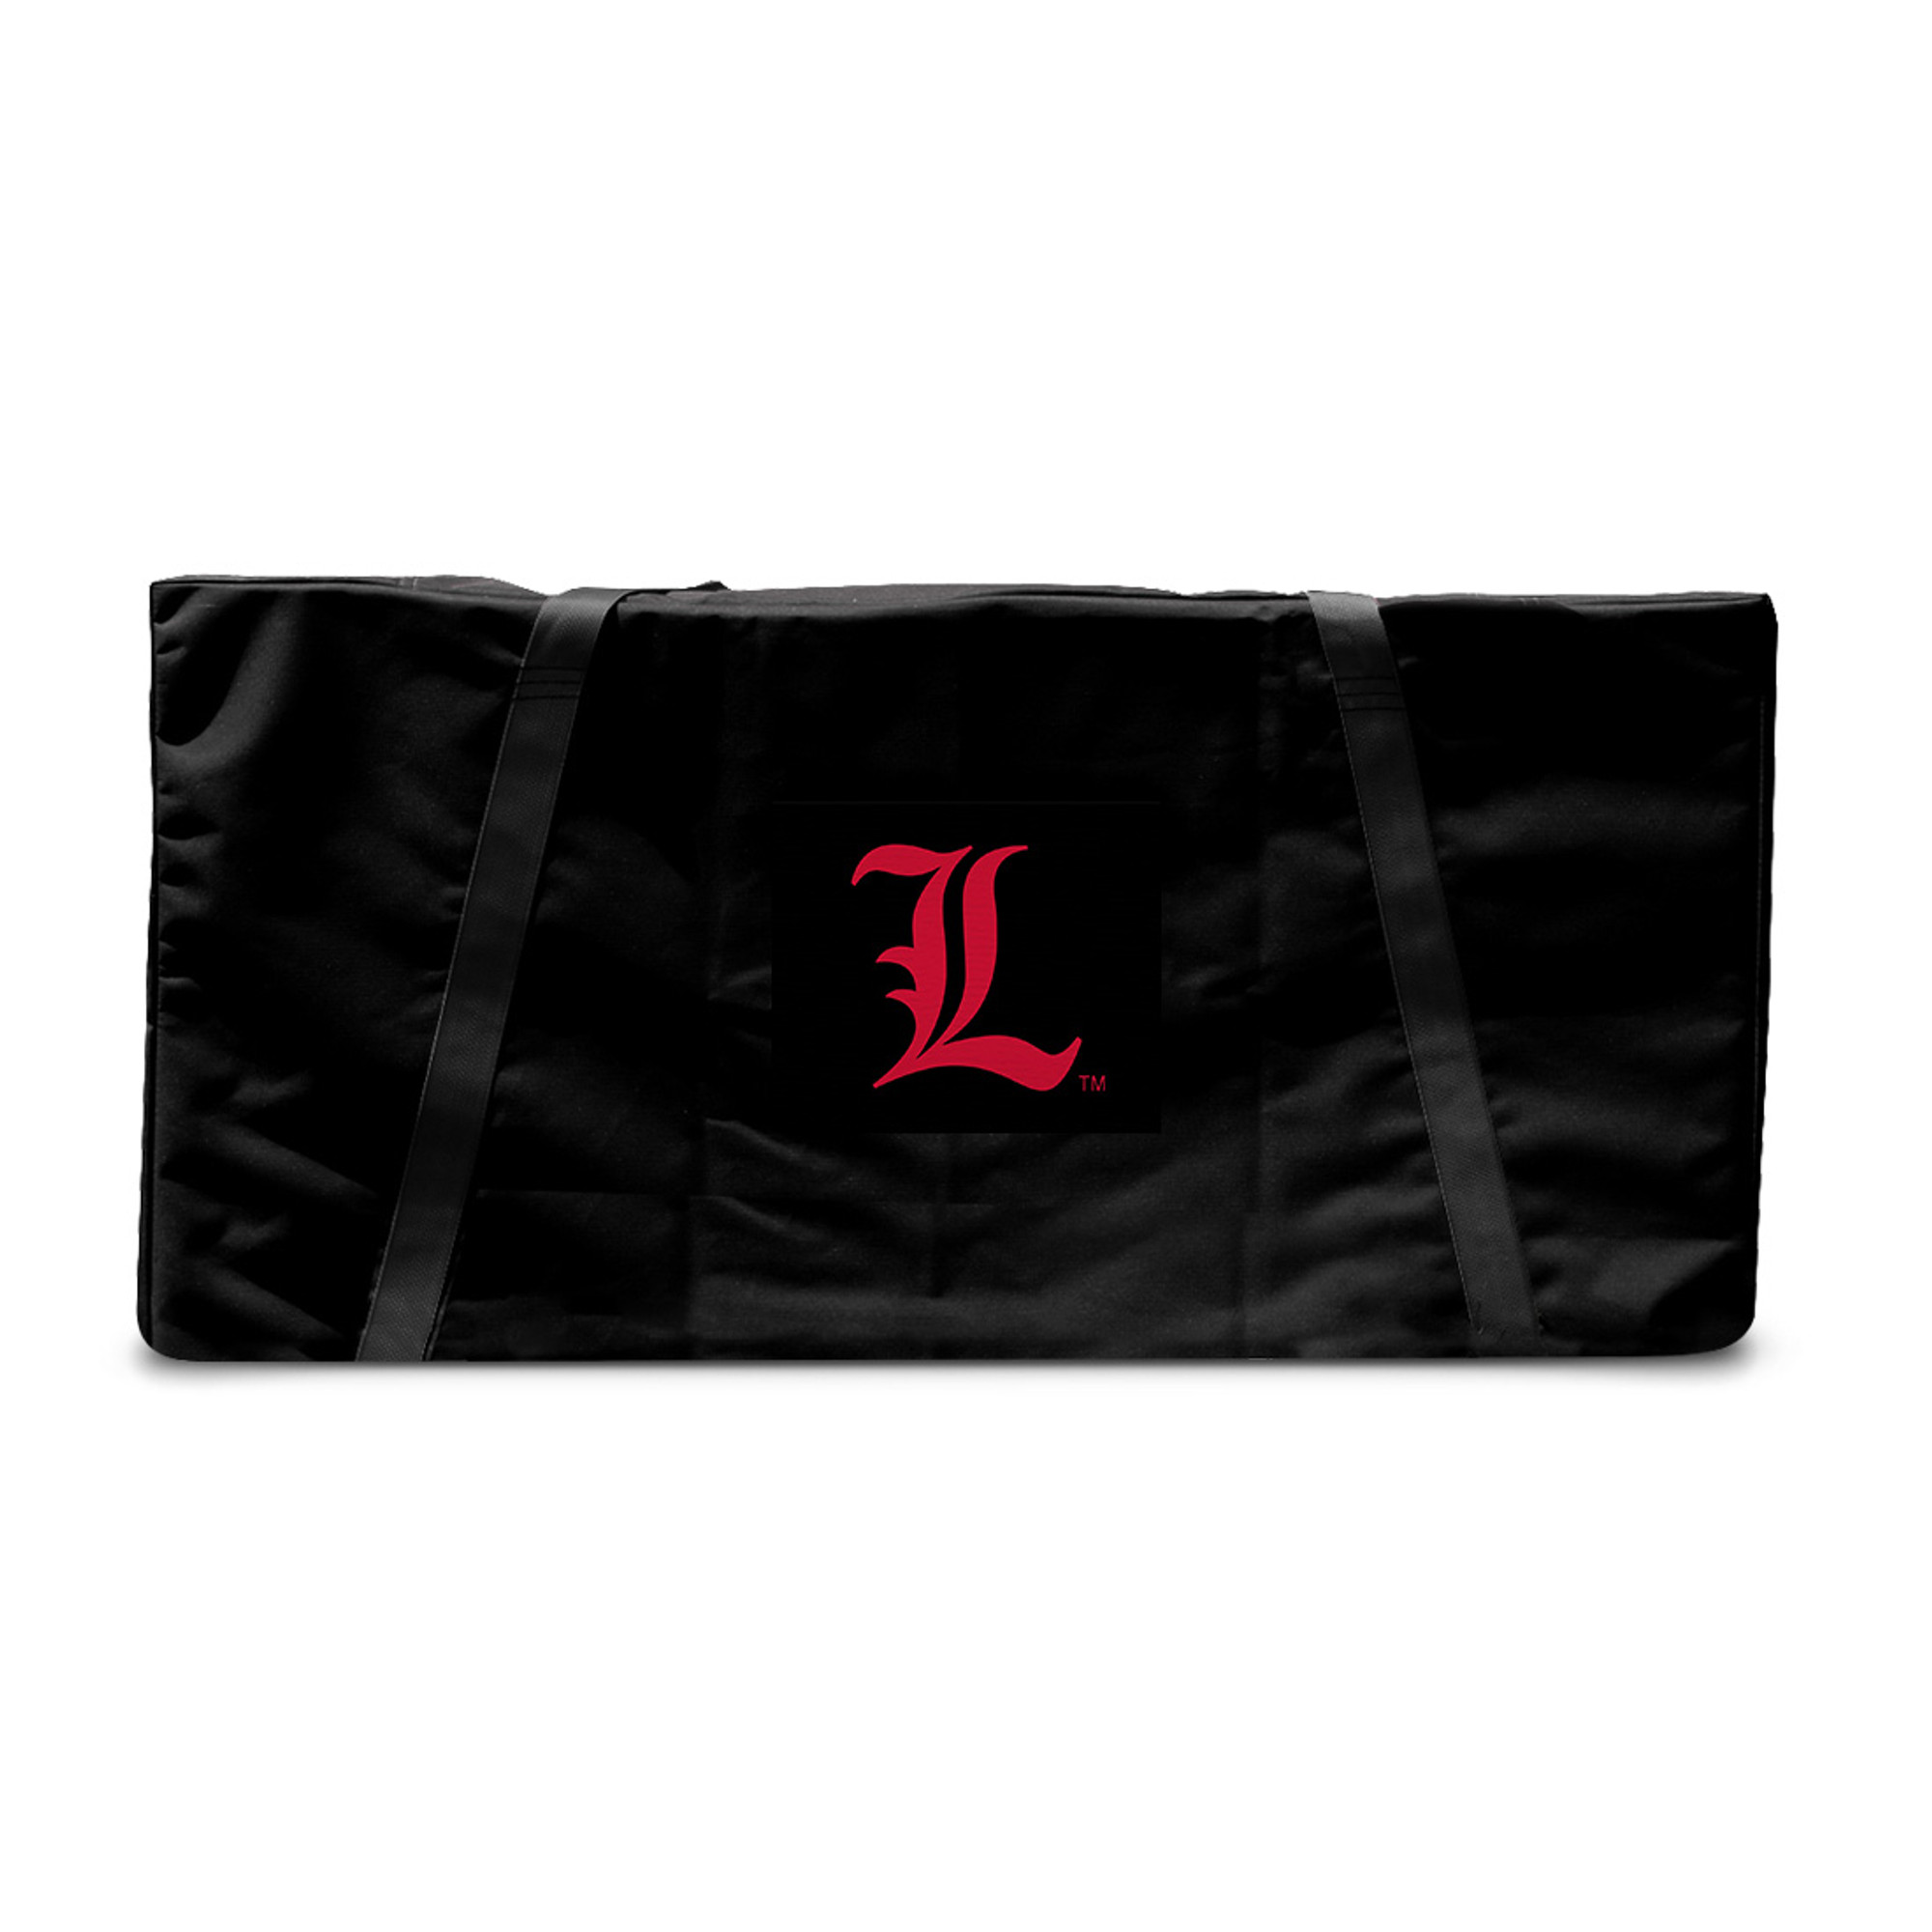 Louisville Cardinals Storage Case with Coat Hangers - Sports Unlimited